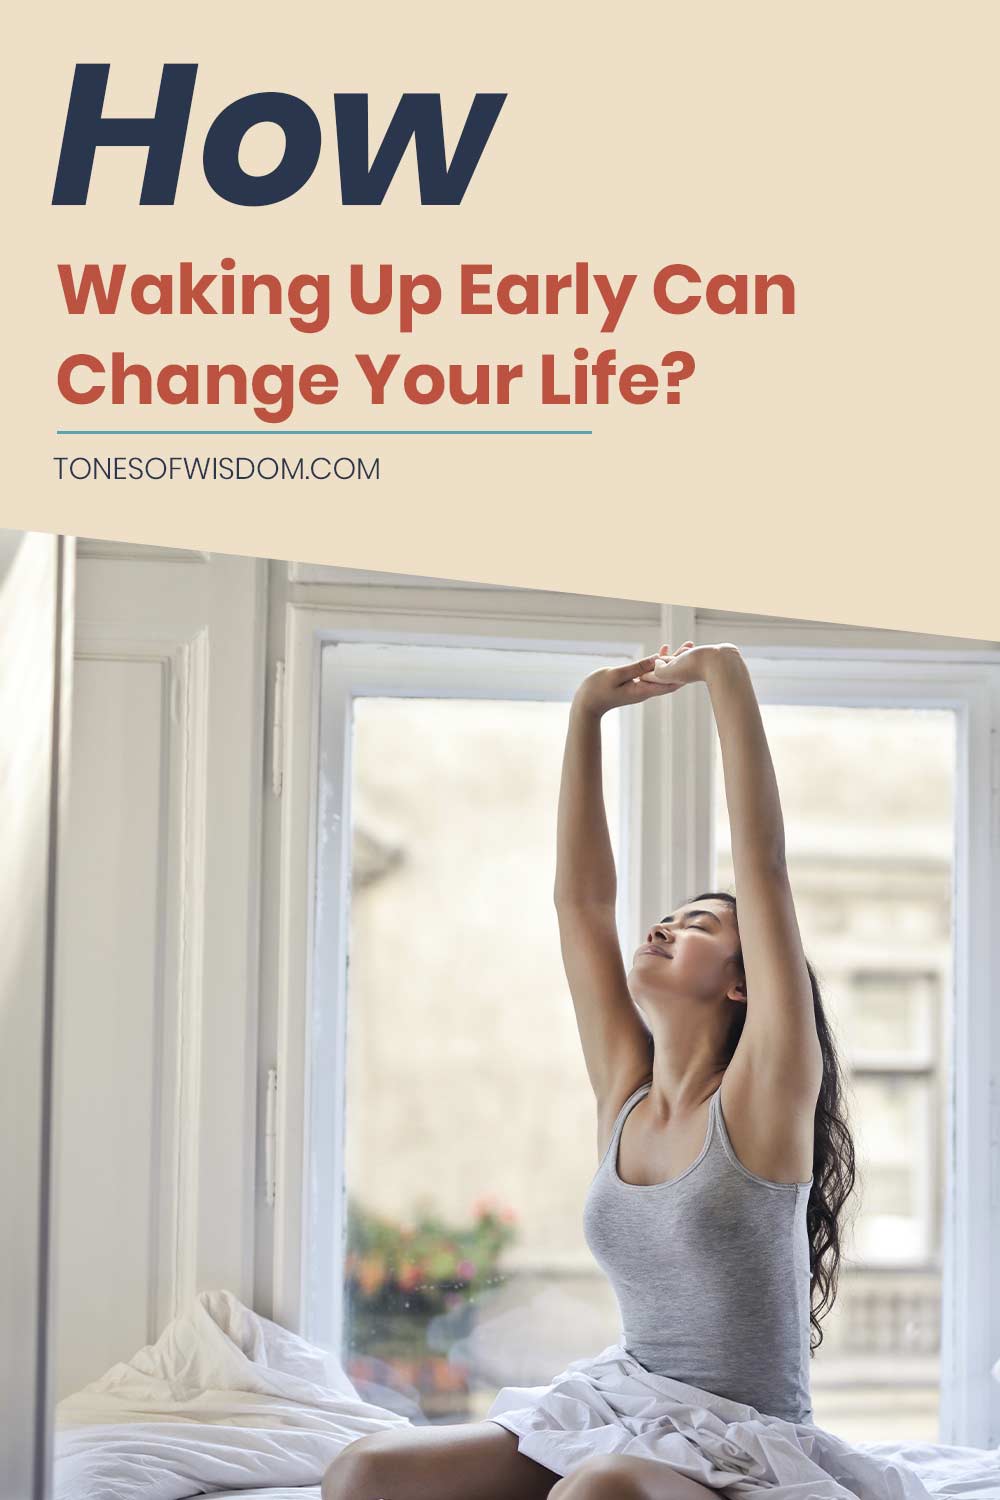 Woman stretching sitting on bed after waking up - How Waking Up Early Can Change Your Life?